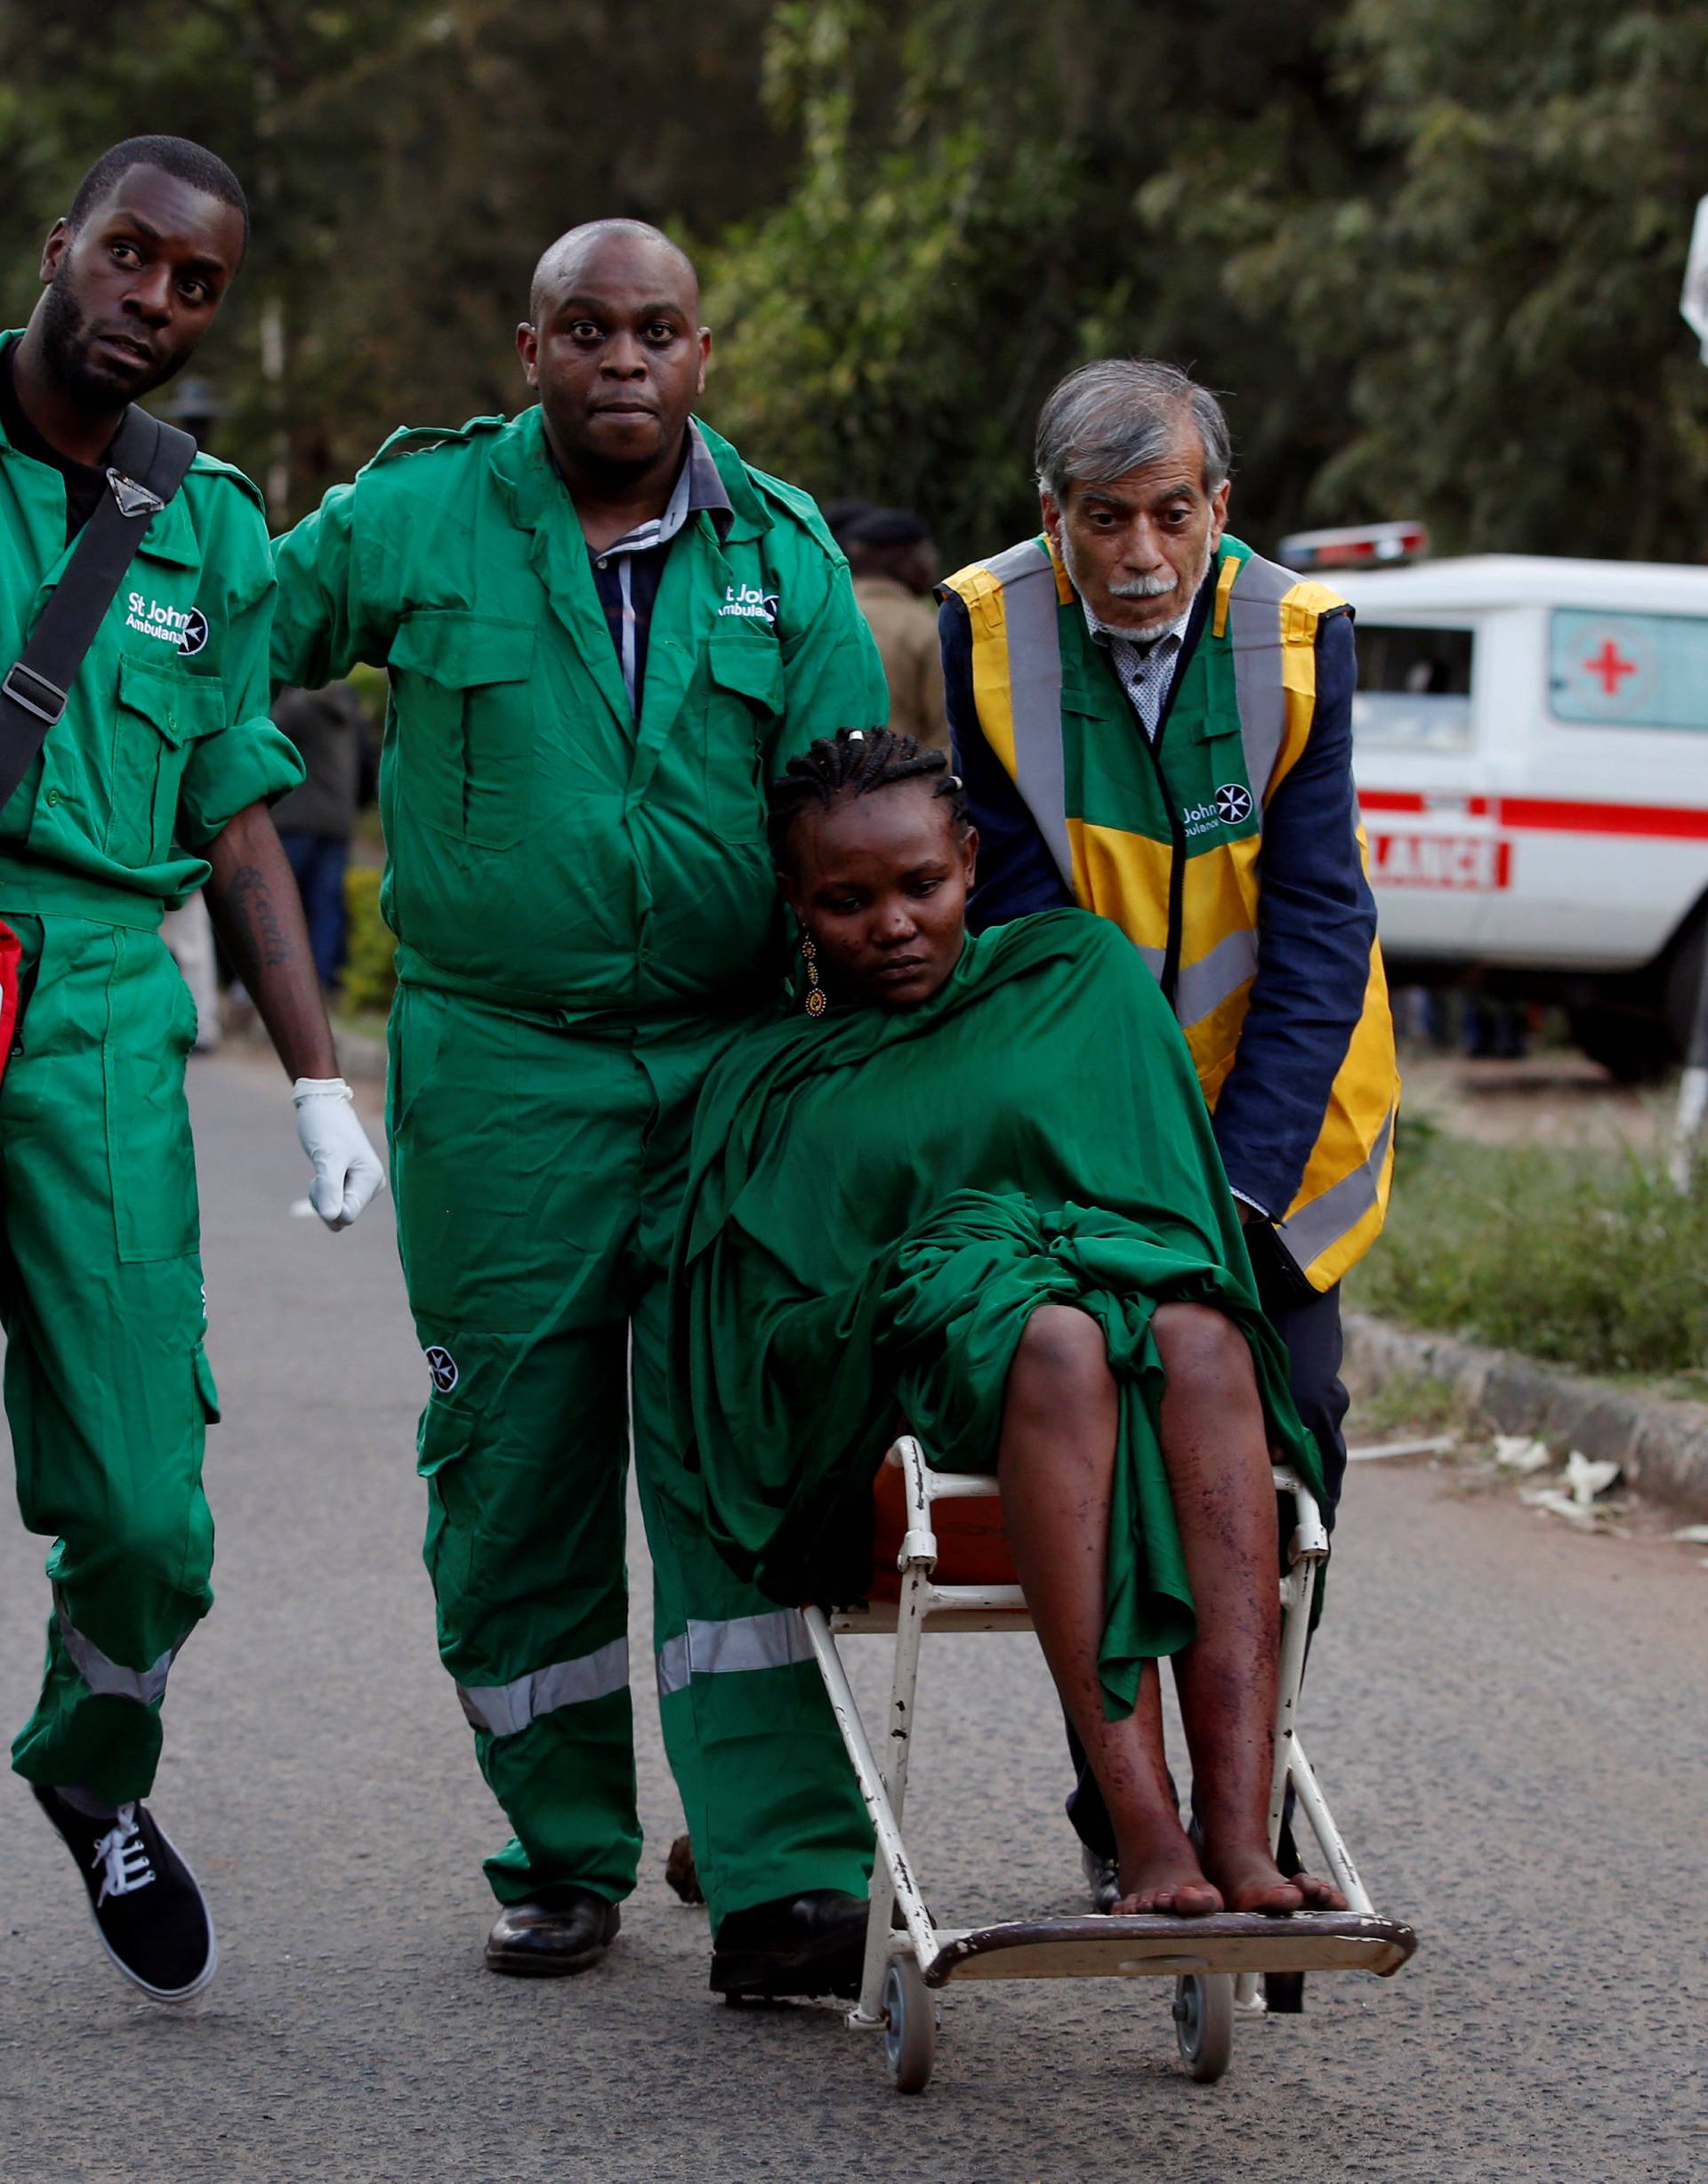 An injured woman is evacuated from the scene where explosions and gunshots were heard at the Dusit hotel compound, in Nairobi